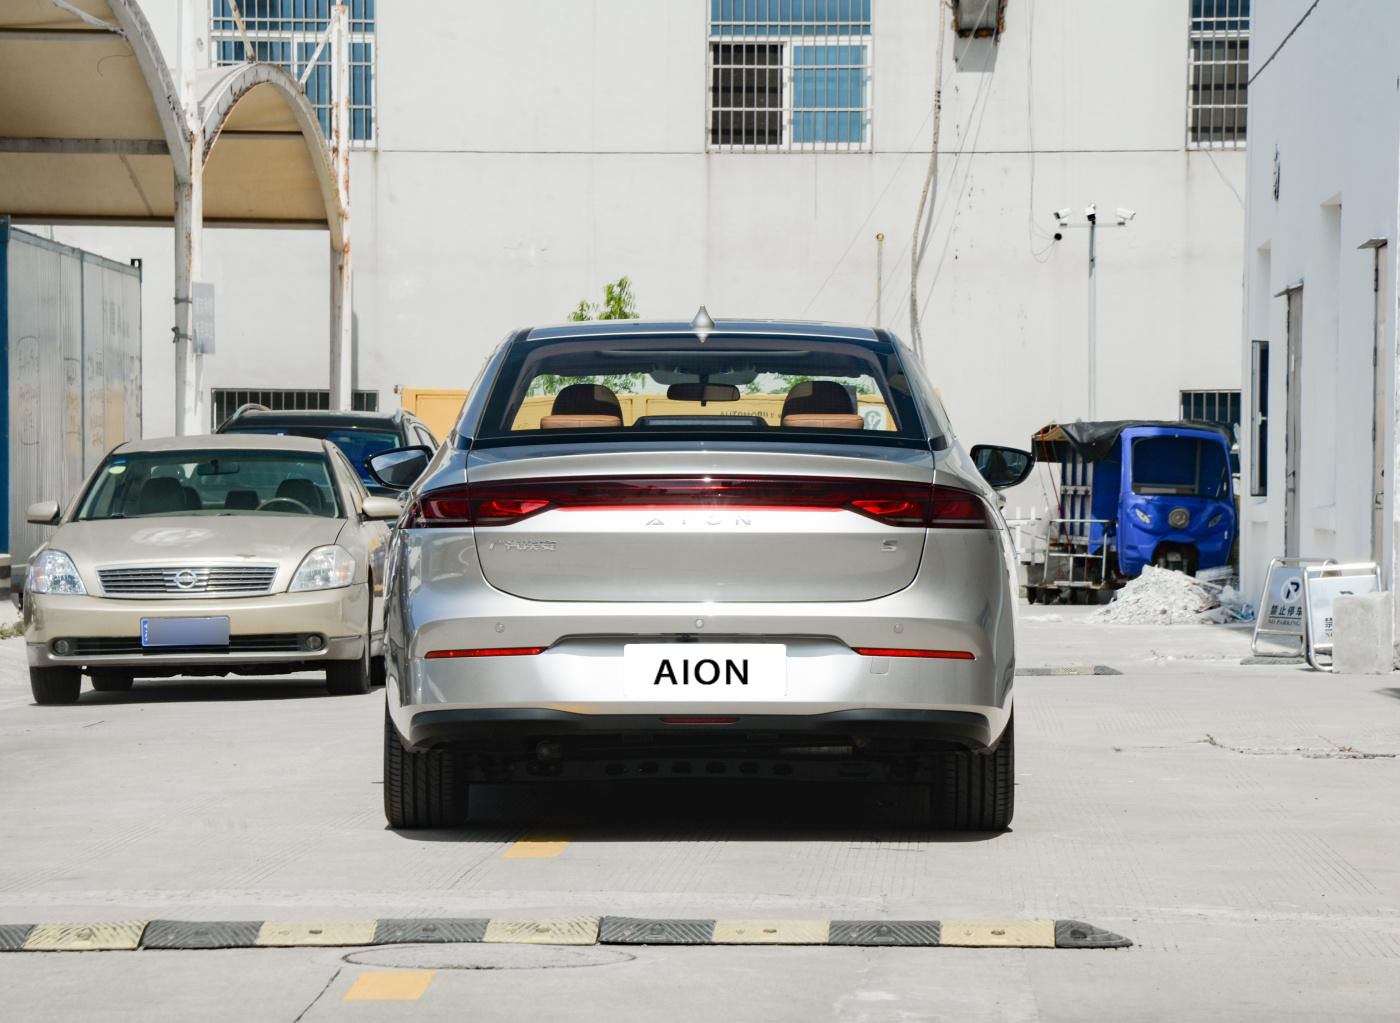 GAC AION New Energy Vehicle, AION S Mei 580 Electric Sedan To Export Trade - AION - 5